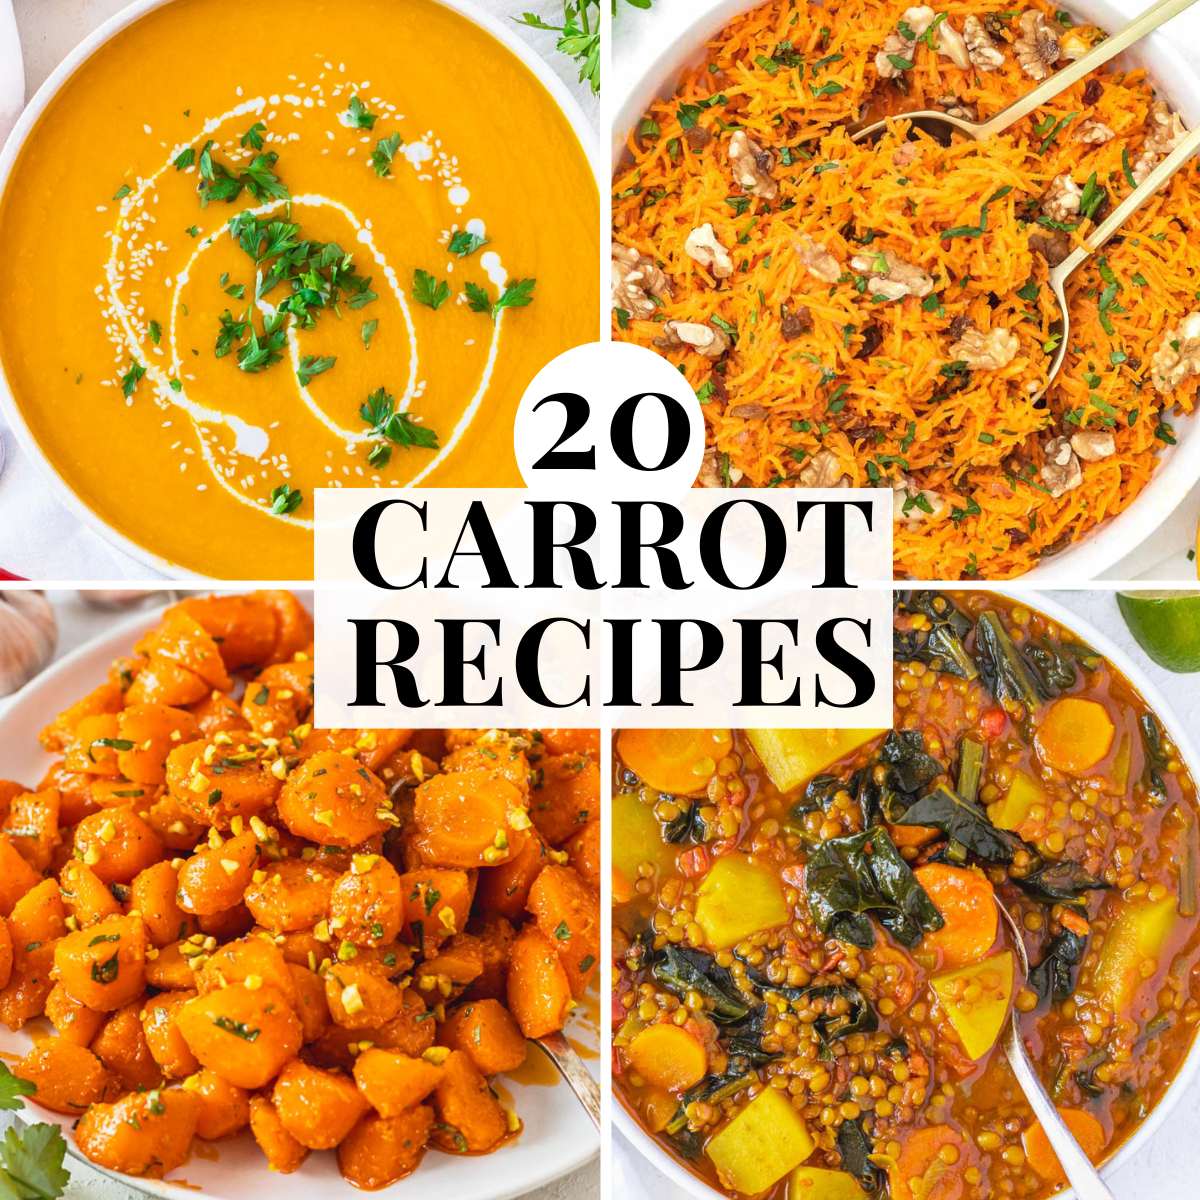 Easy carrot recipes with soups, salads, and side dishes